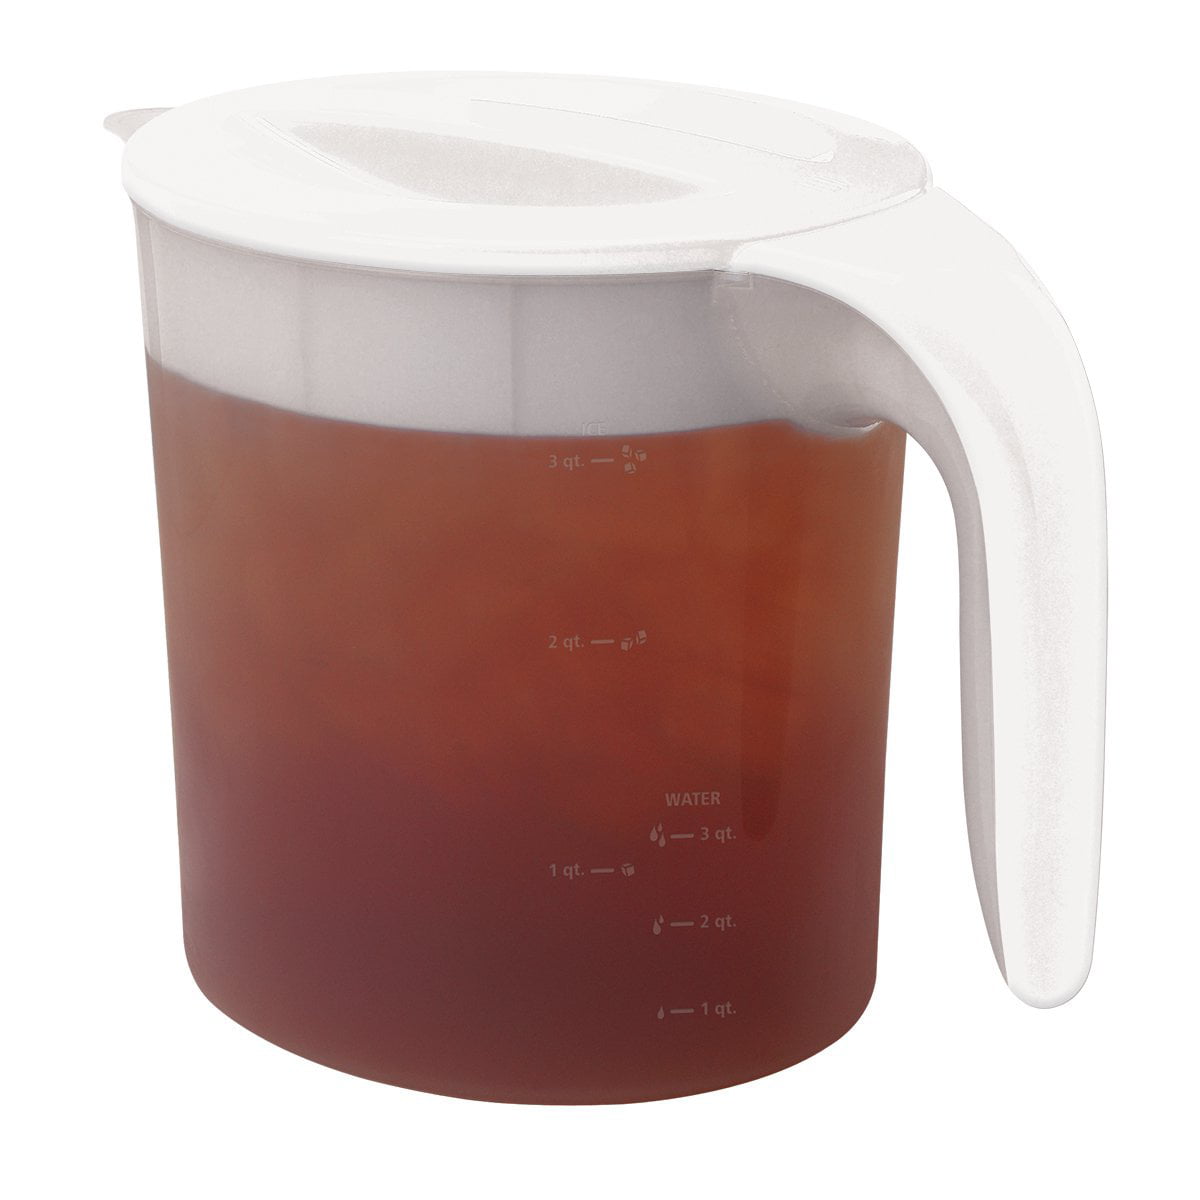 Mr. Coffee Replacement 2 Quart Pitcher for Iced Tea Pot Maker Red Lid